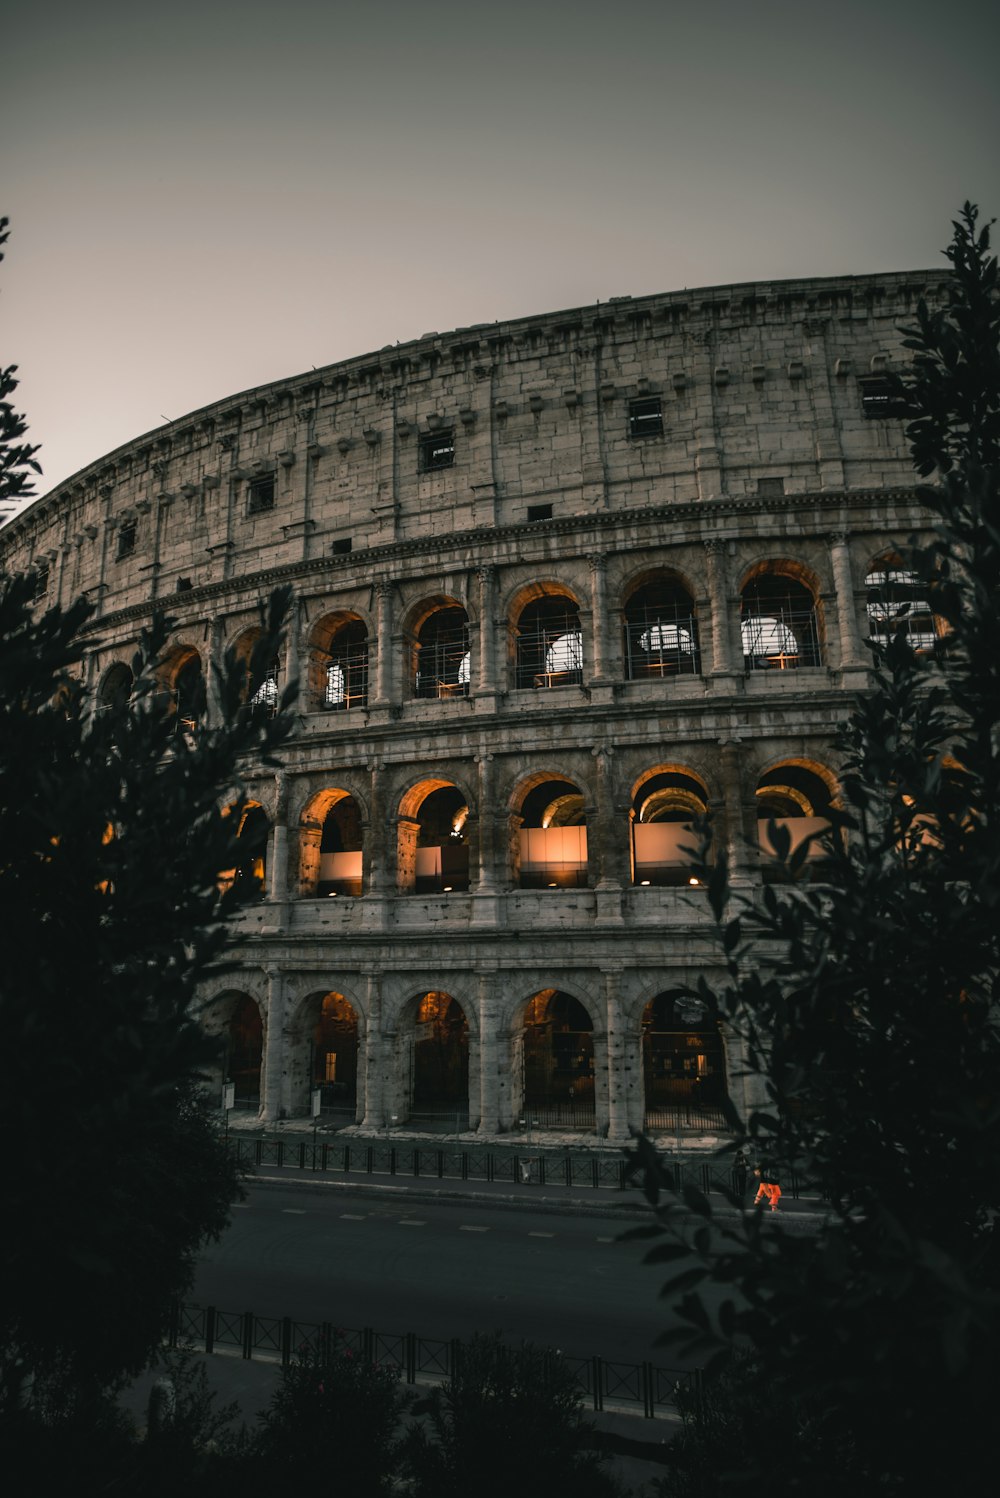 Colosseum of Rome during nighttime